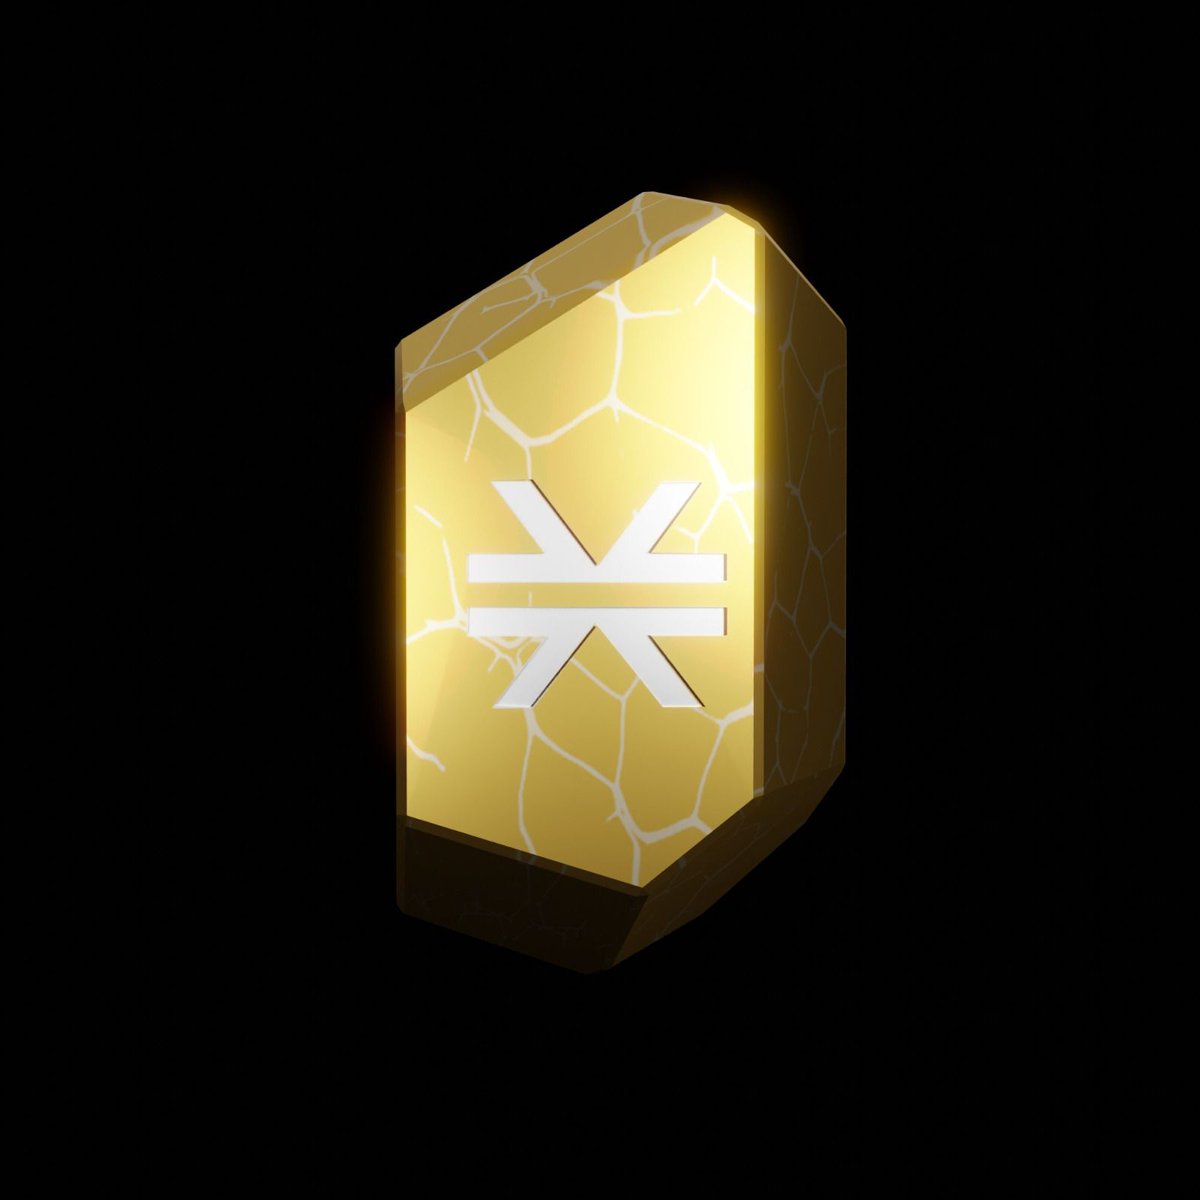 First look:  👇

💛GOLD STONE ASSET FROM STXSTONE ORDINALS 

#STXSTONE #ORDINALS